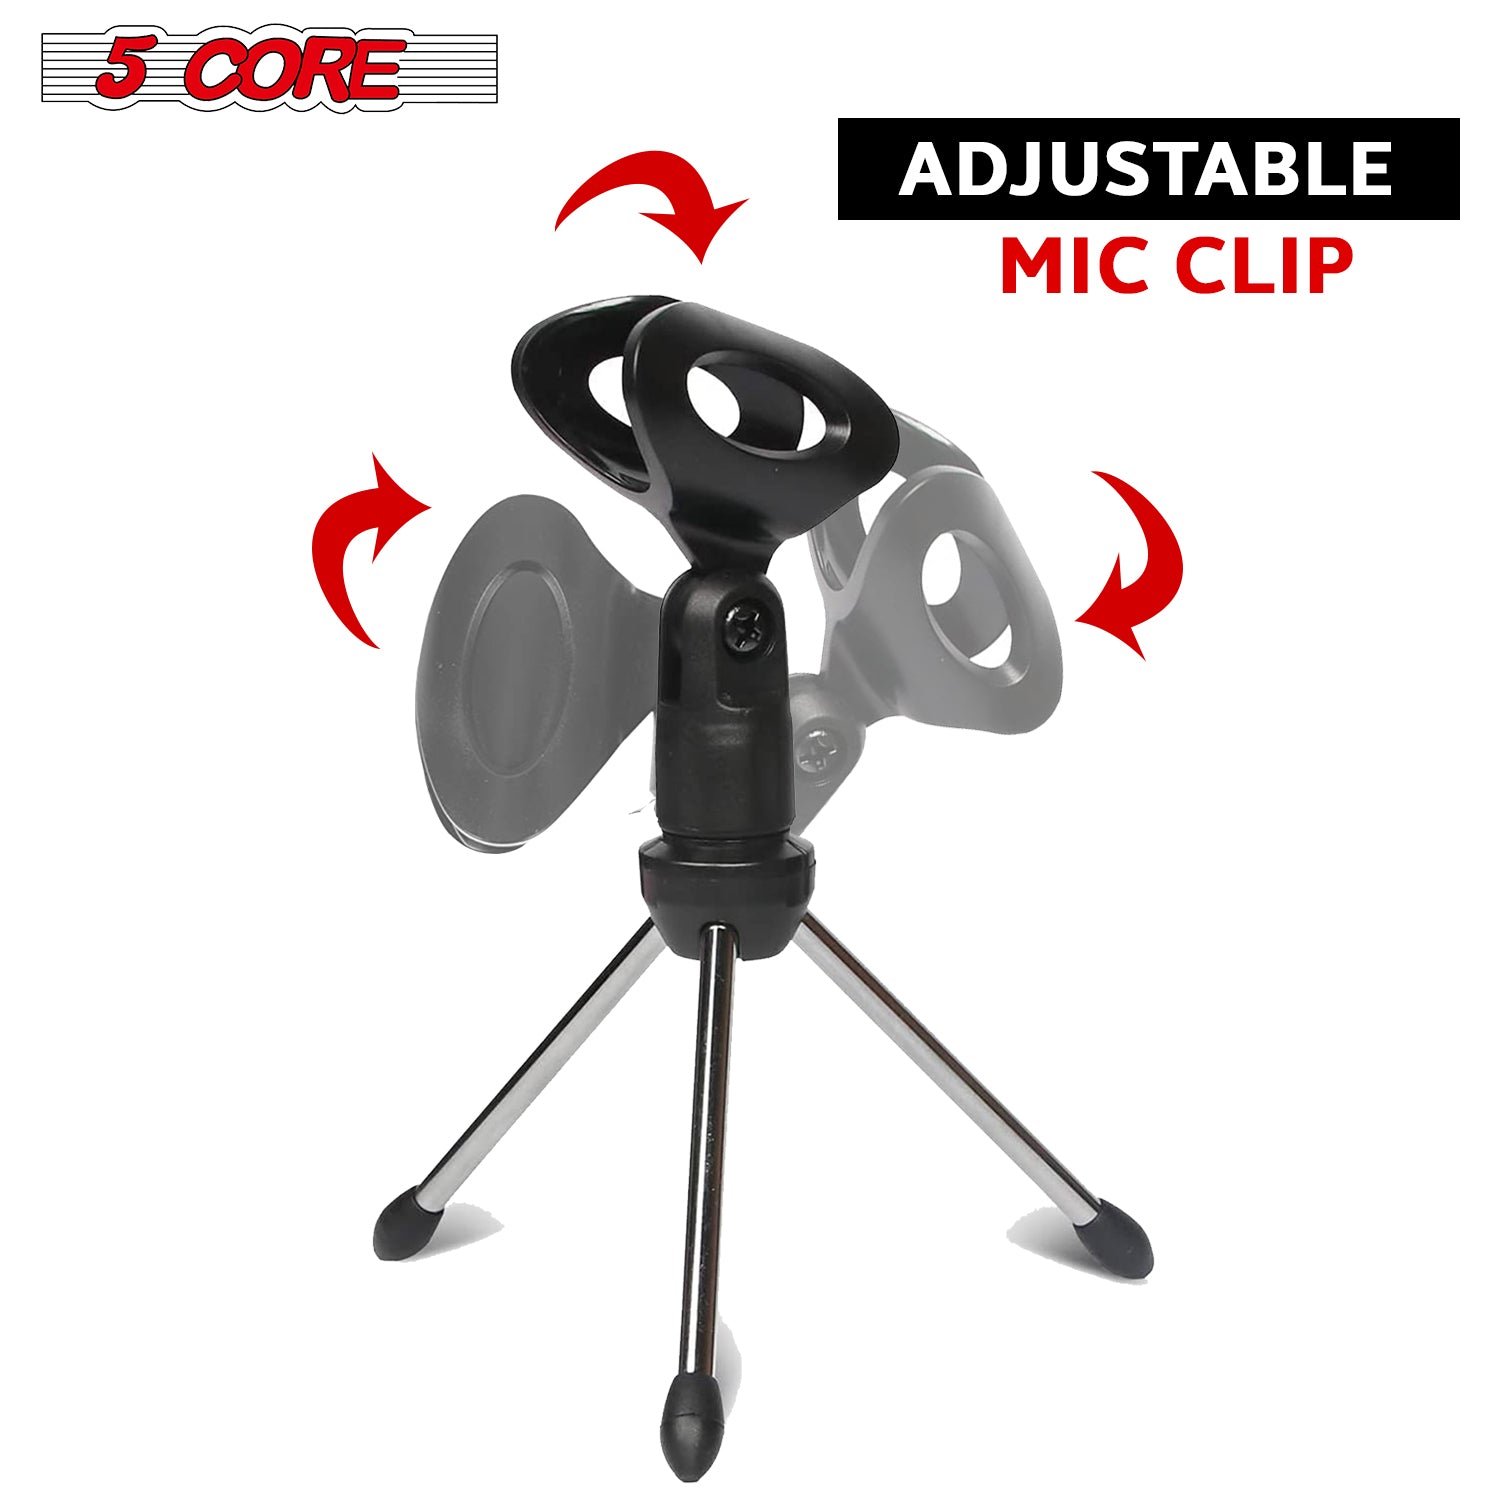 Adjustable mic holder: Ensures optimal positioning for clear audio.